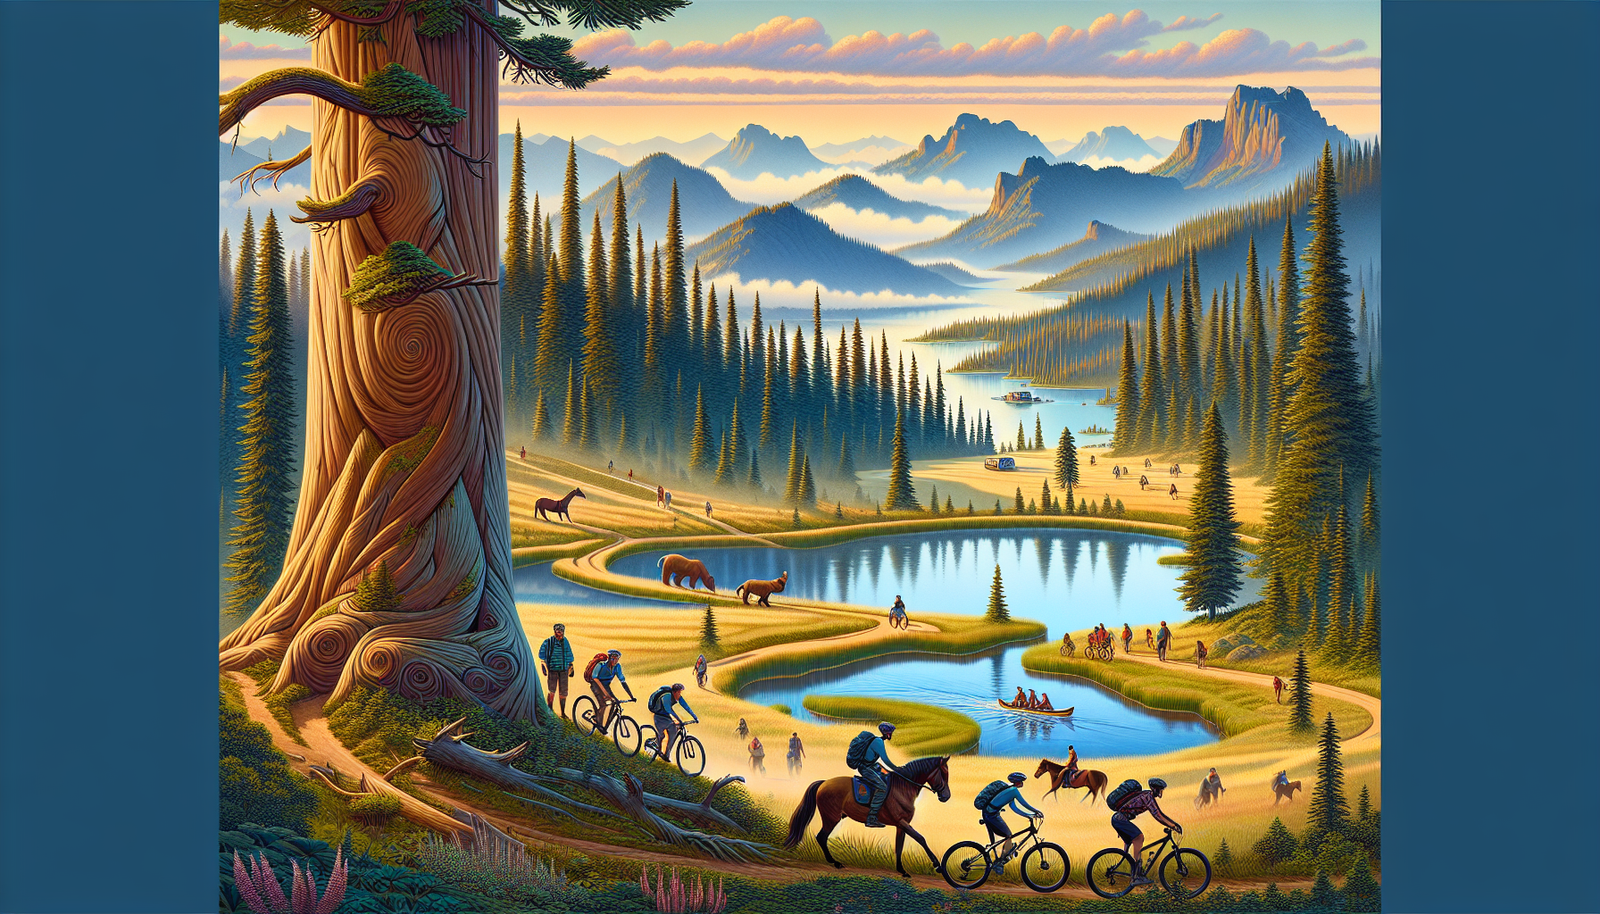 Illustration of Cowichan Valley Trail for hiking and cycling